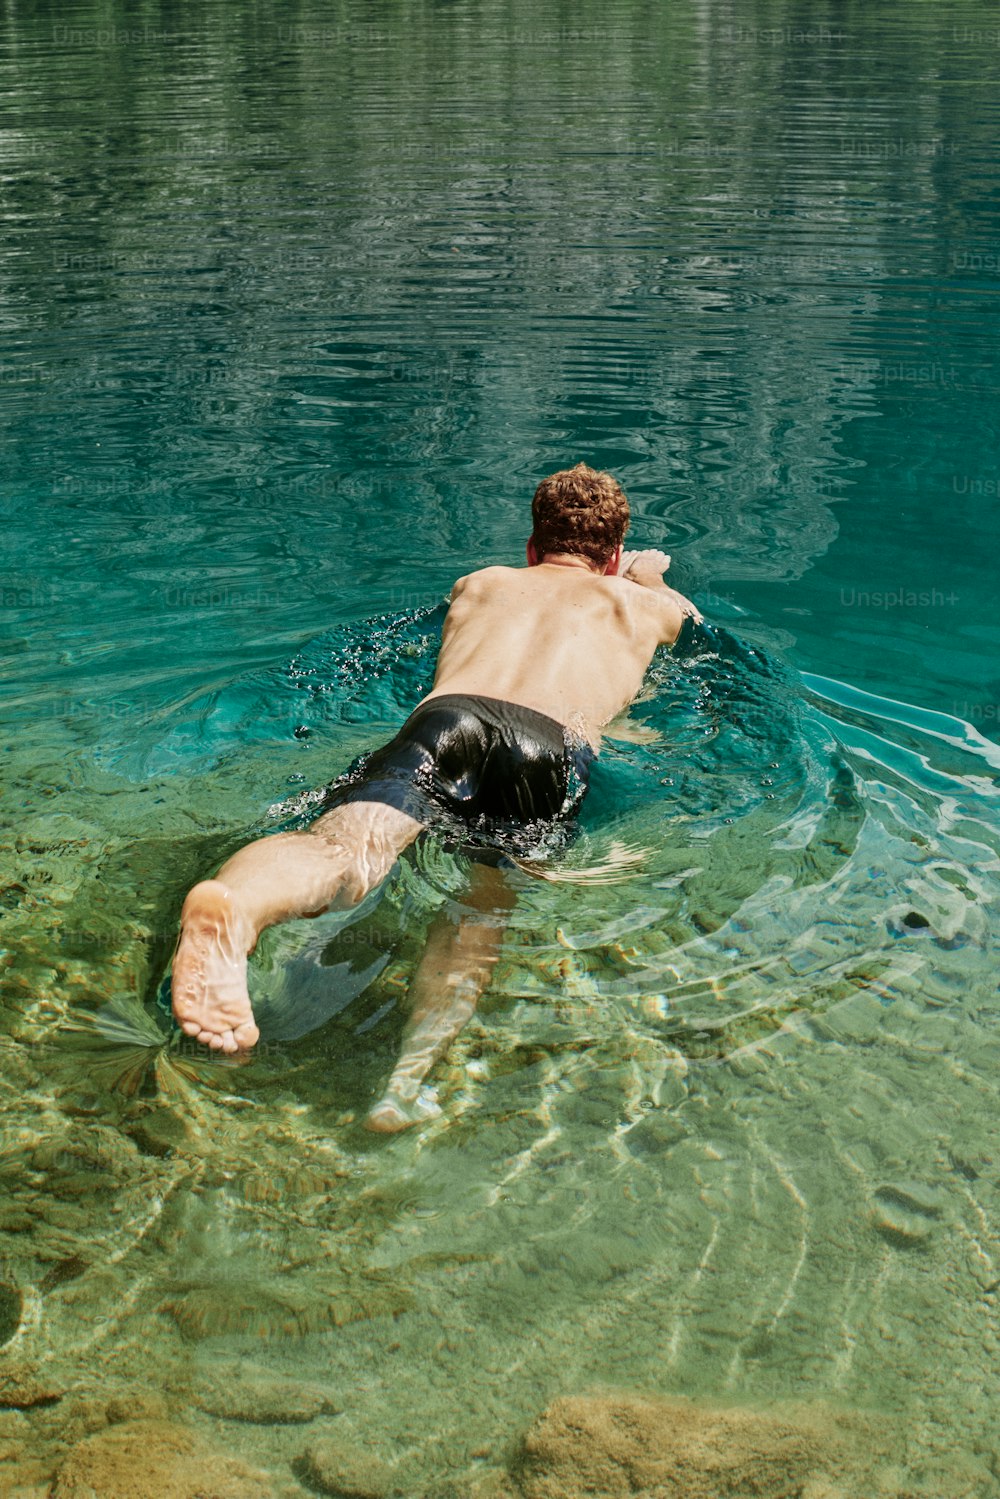 a man swimming in a lake with his back to the camera